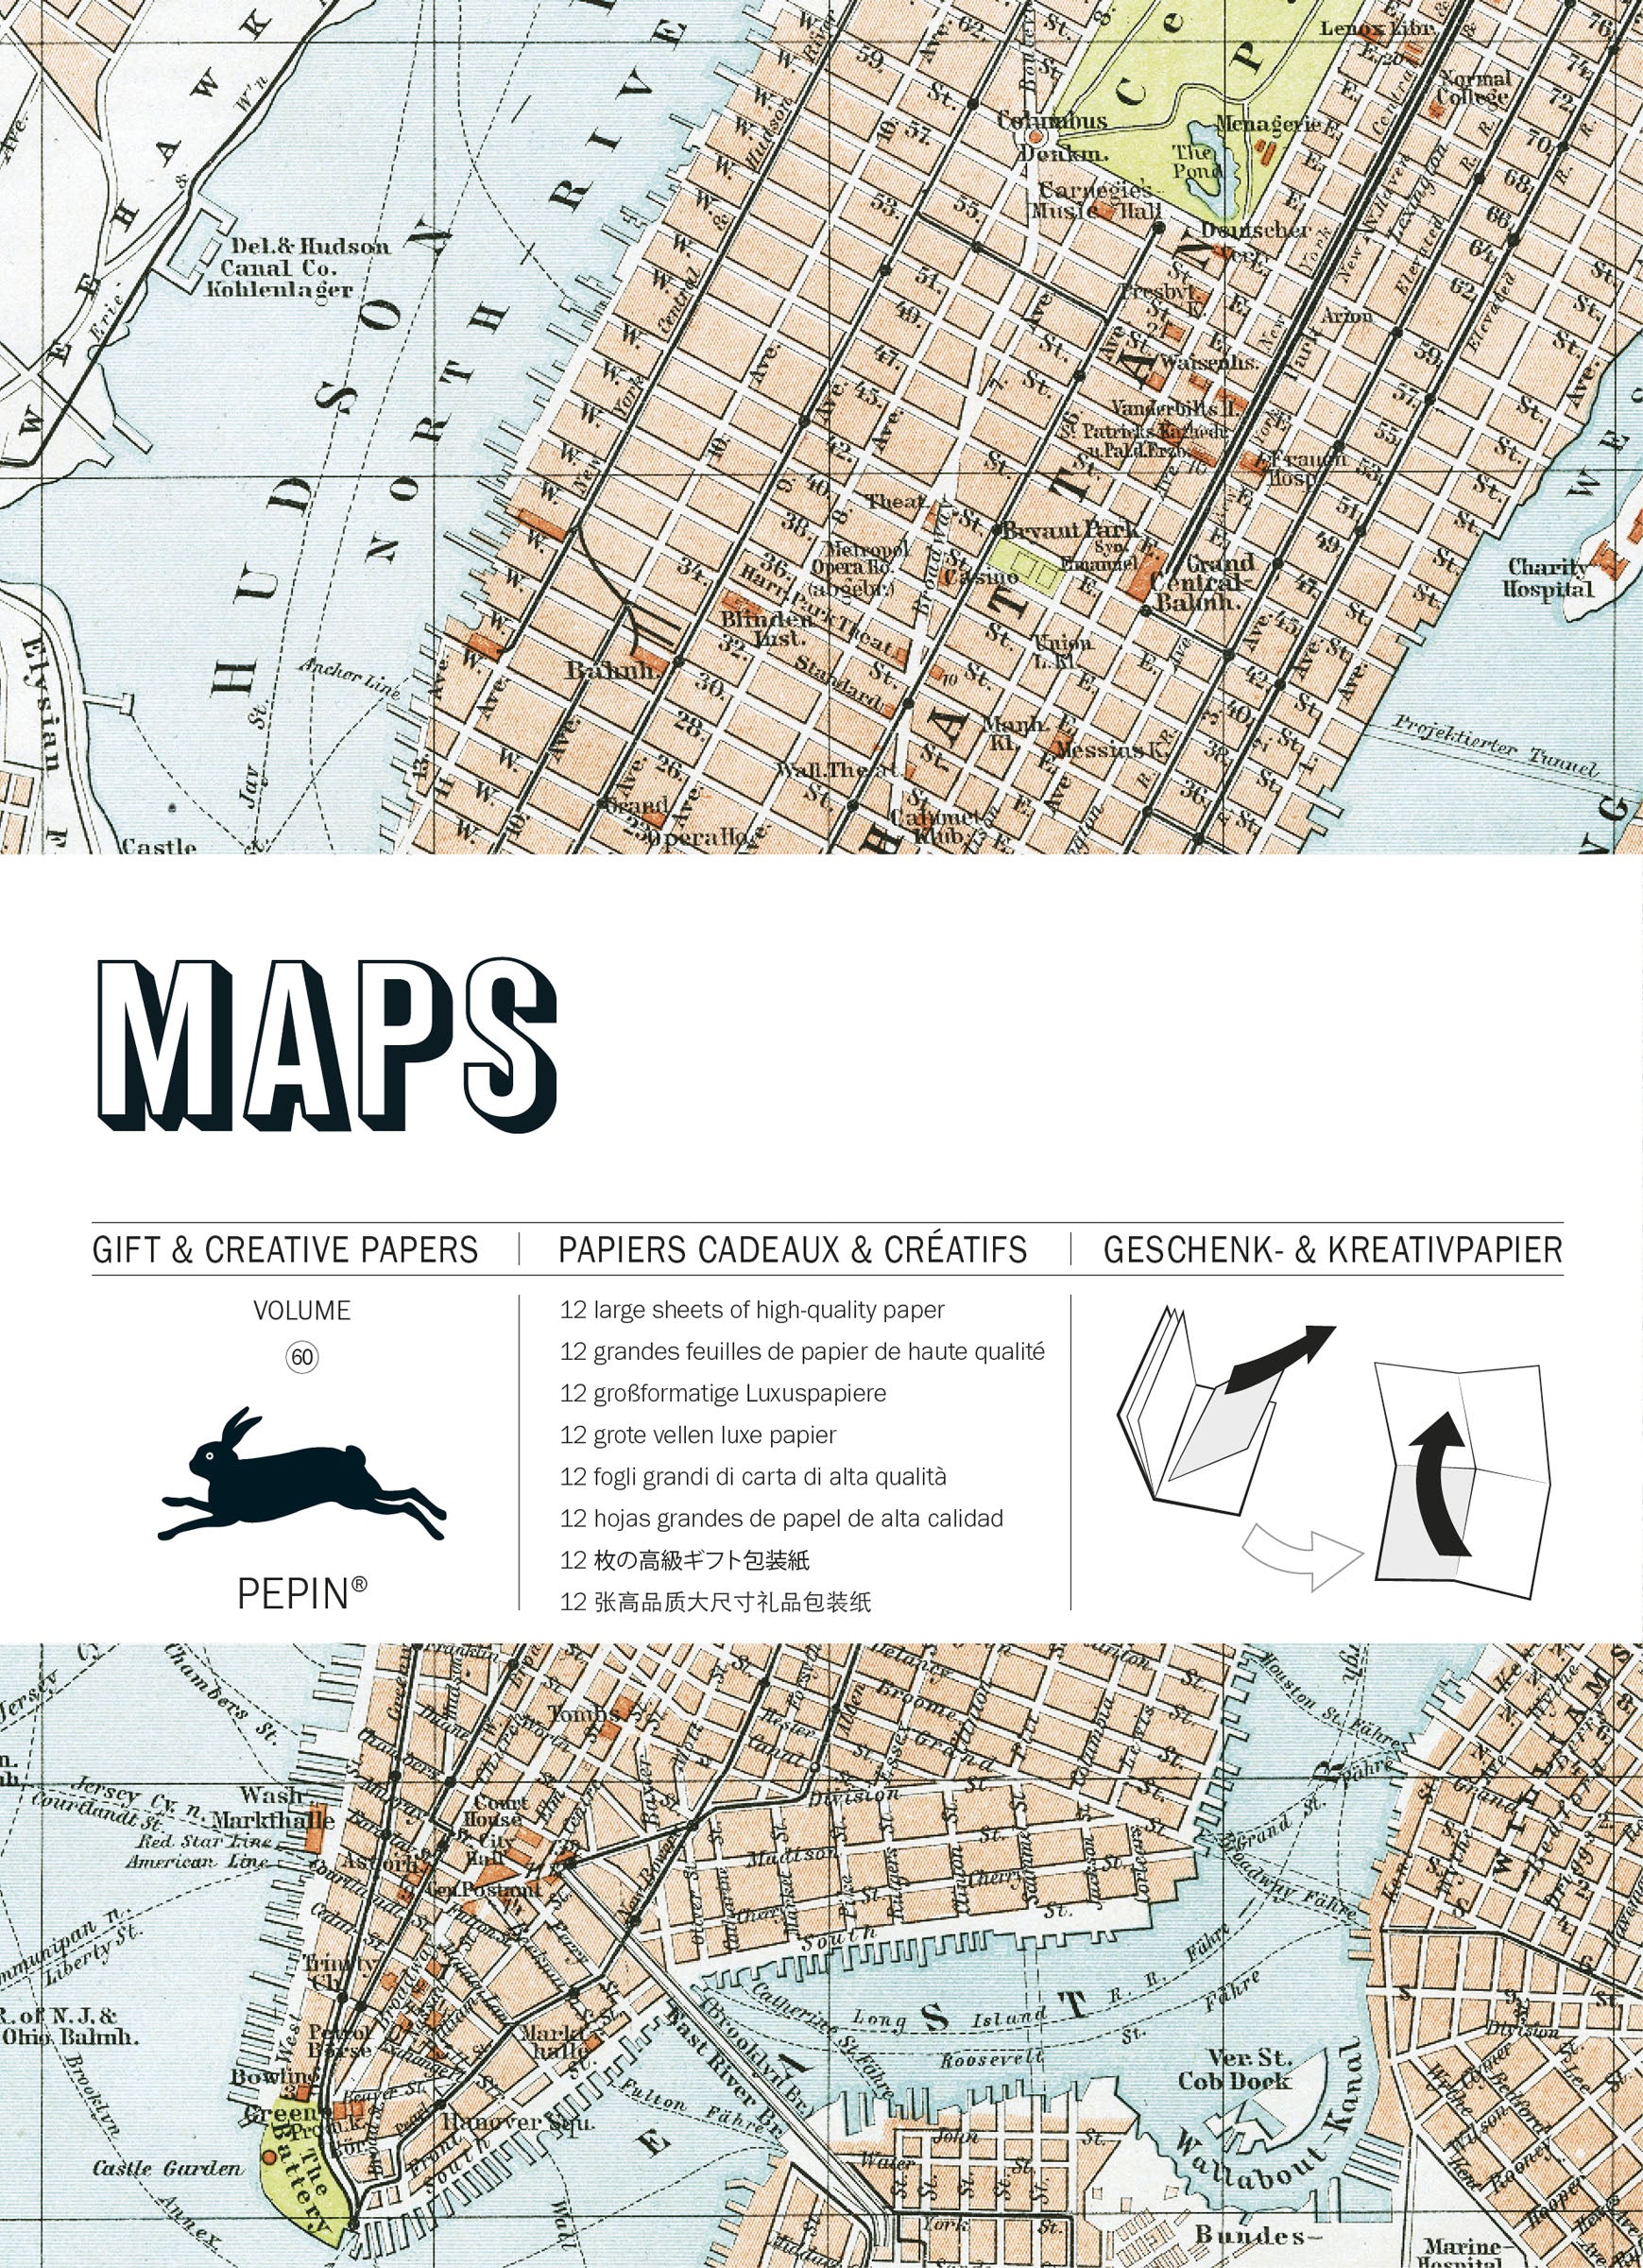 Gift & creative papers - Maps